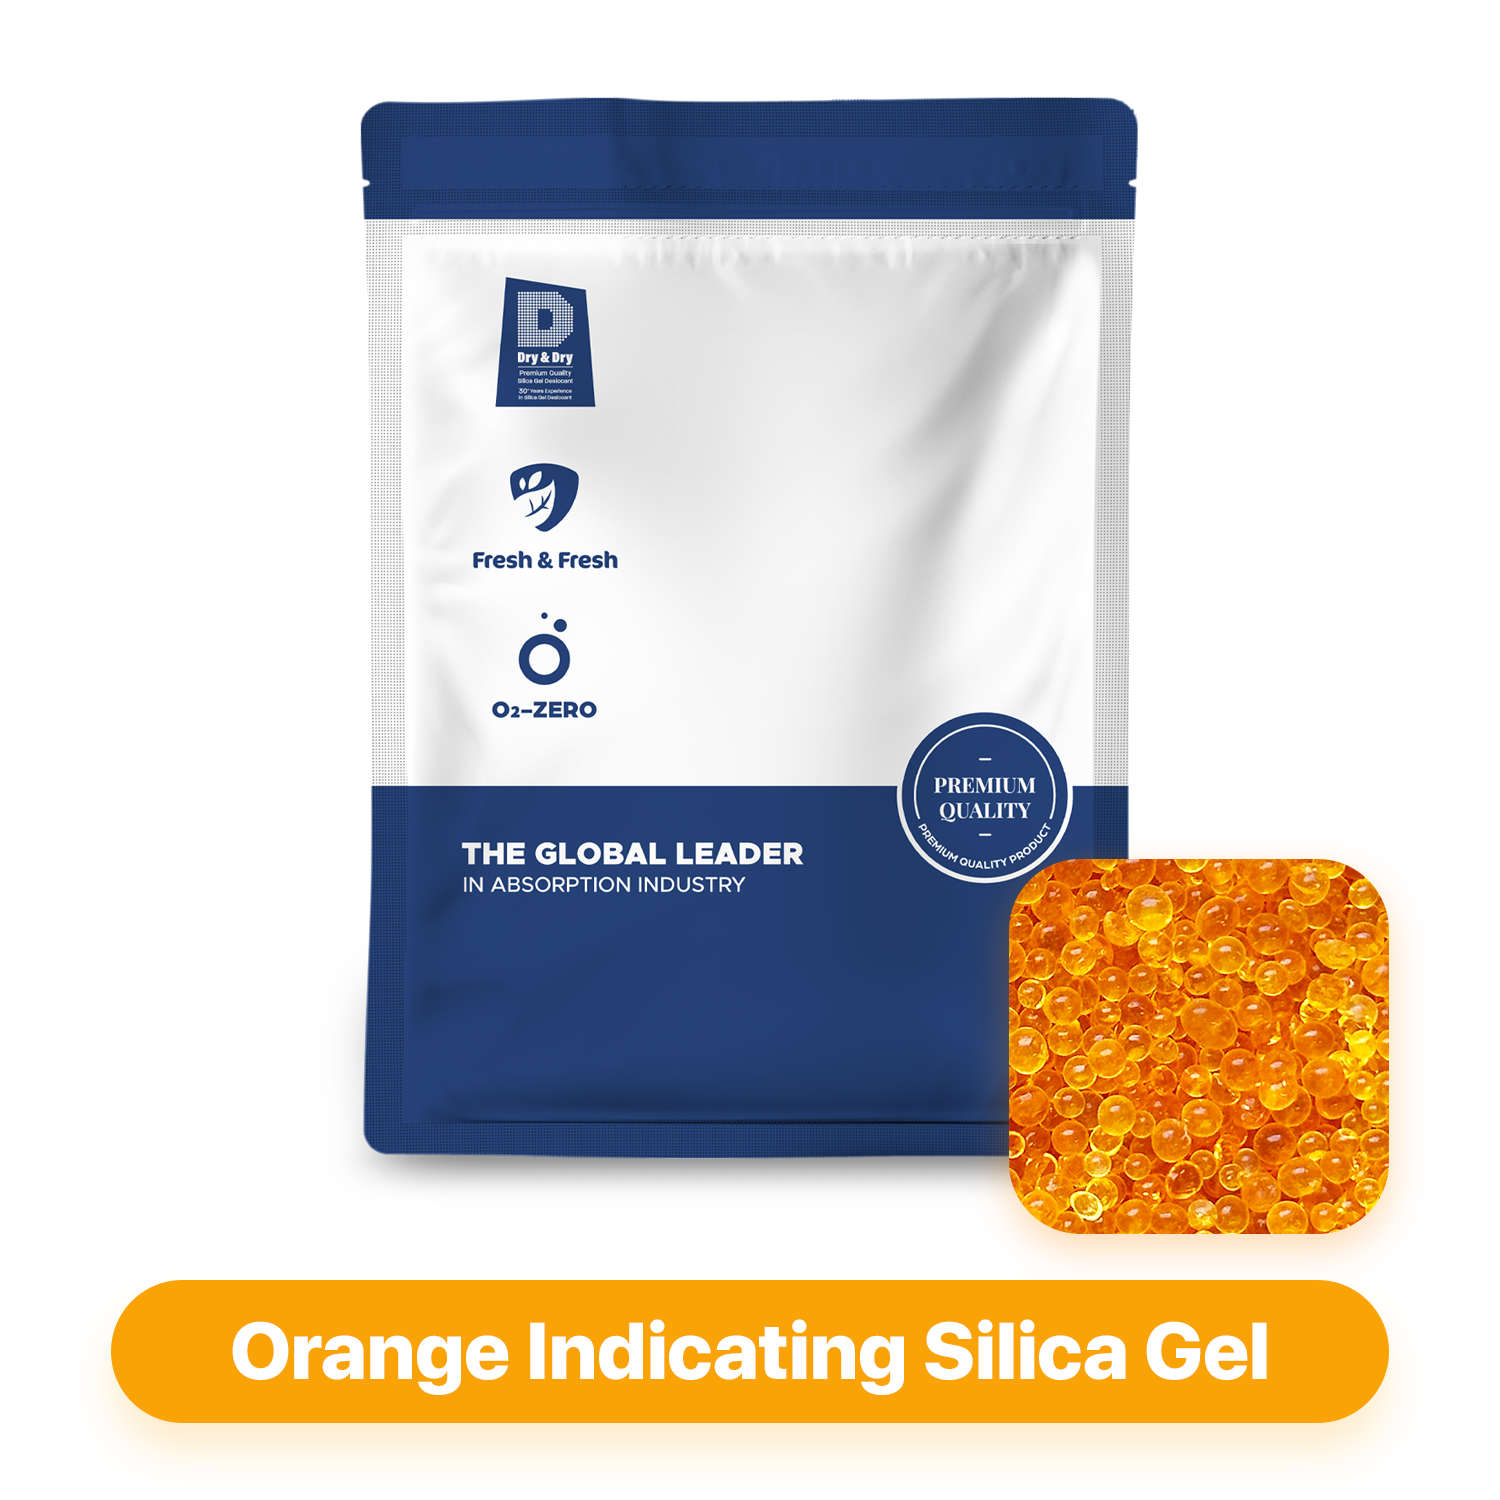 [44 LBS] Blue Premium Indicating Silica Gel Beads (3-5 mm) -(1 Sack of 44  LBS)